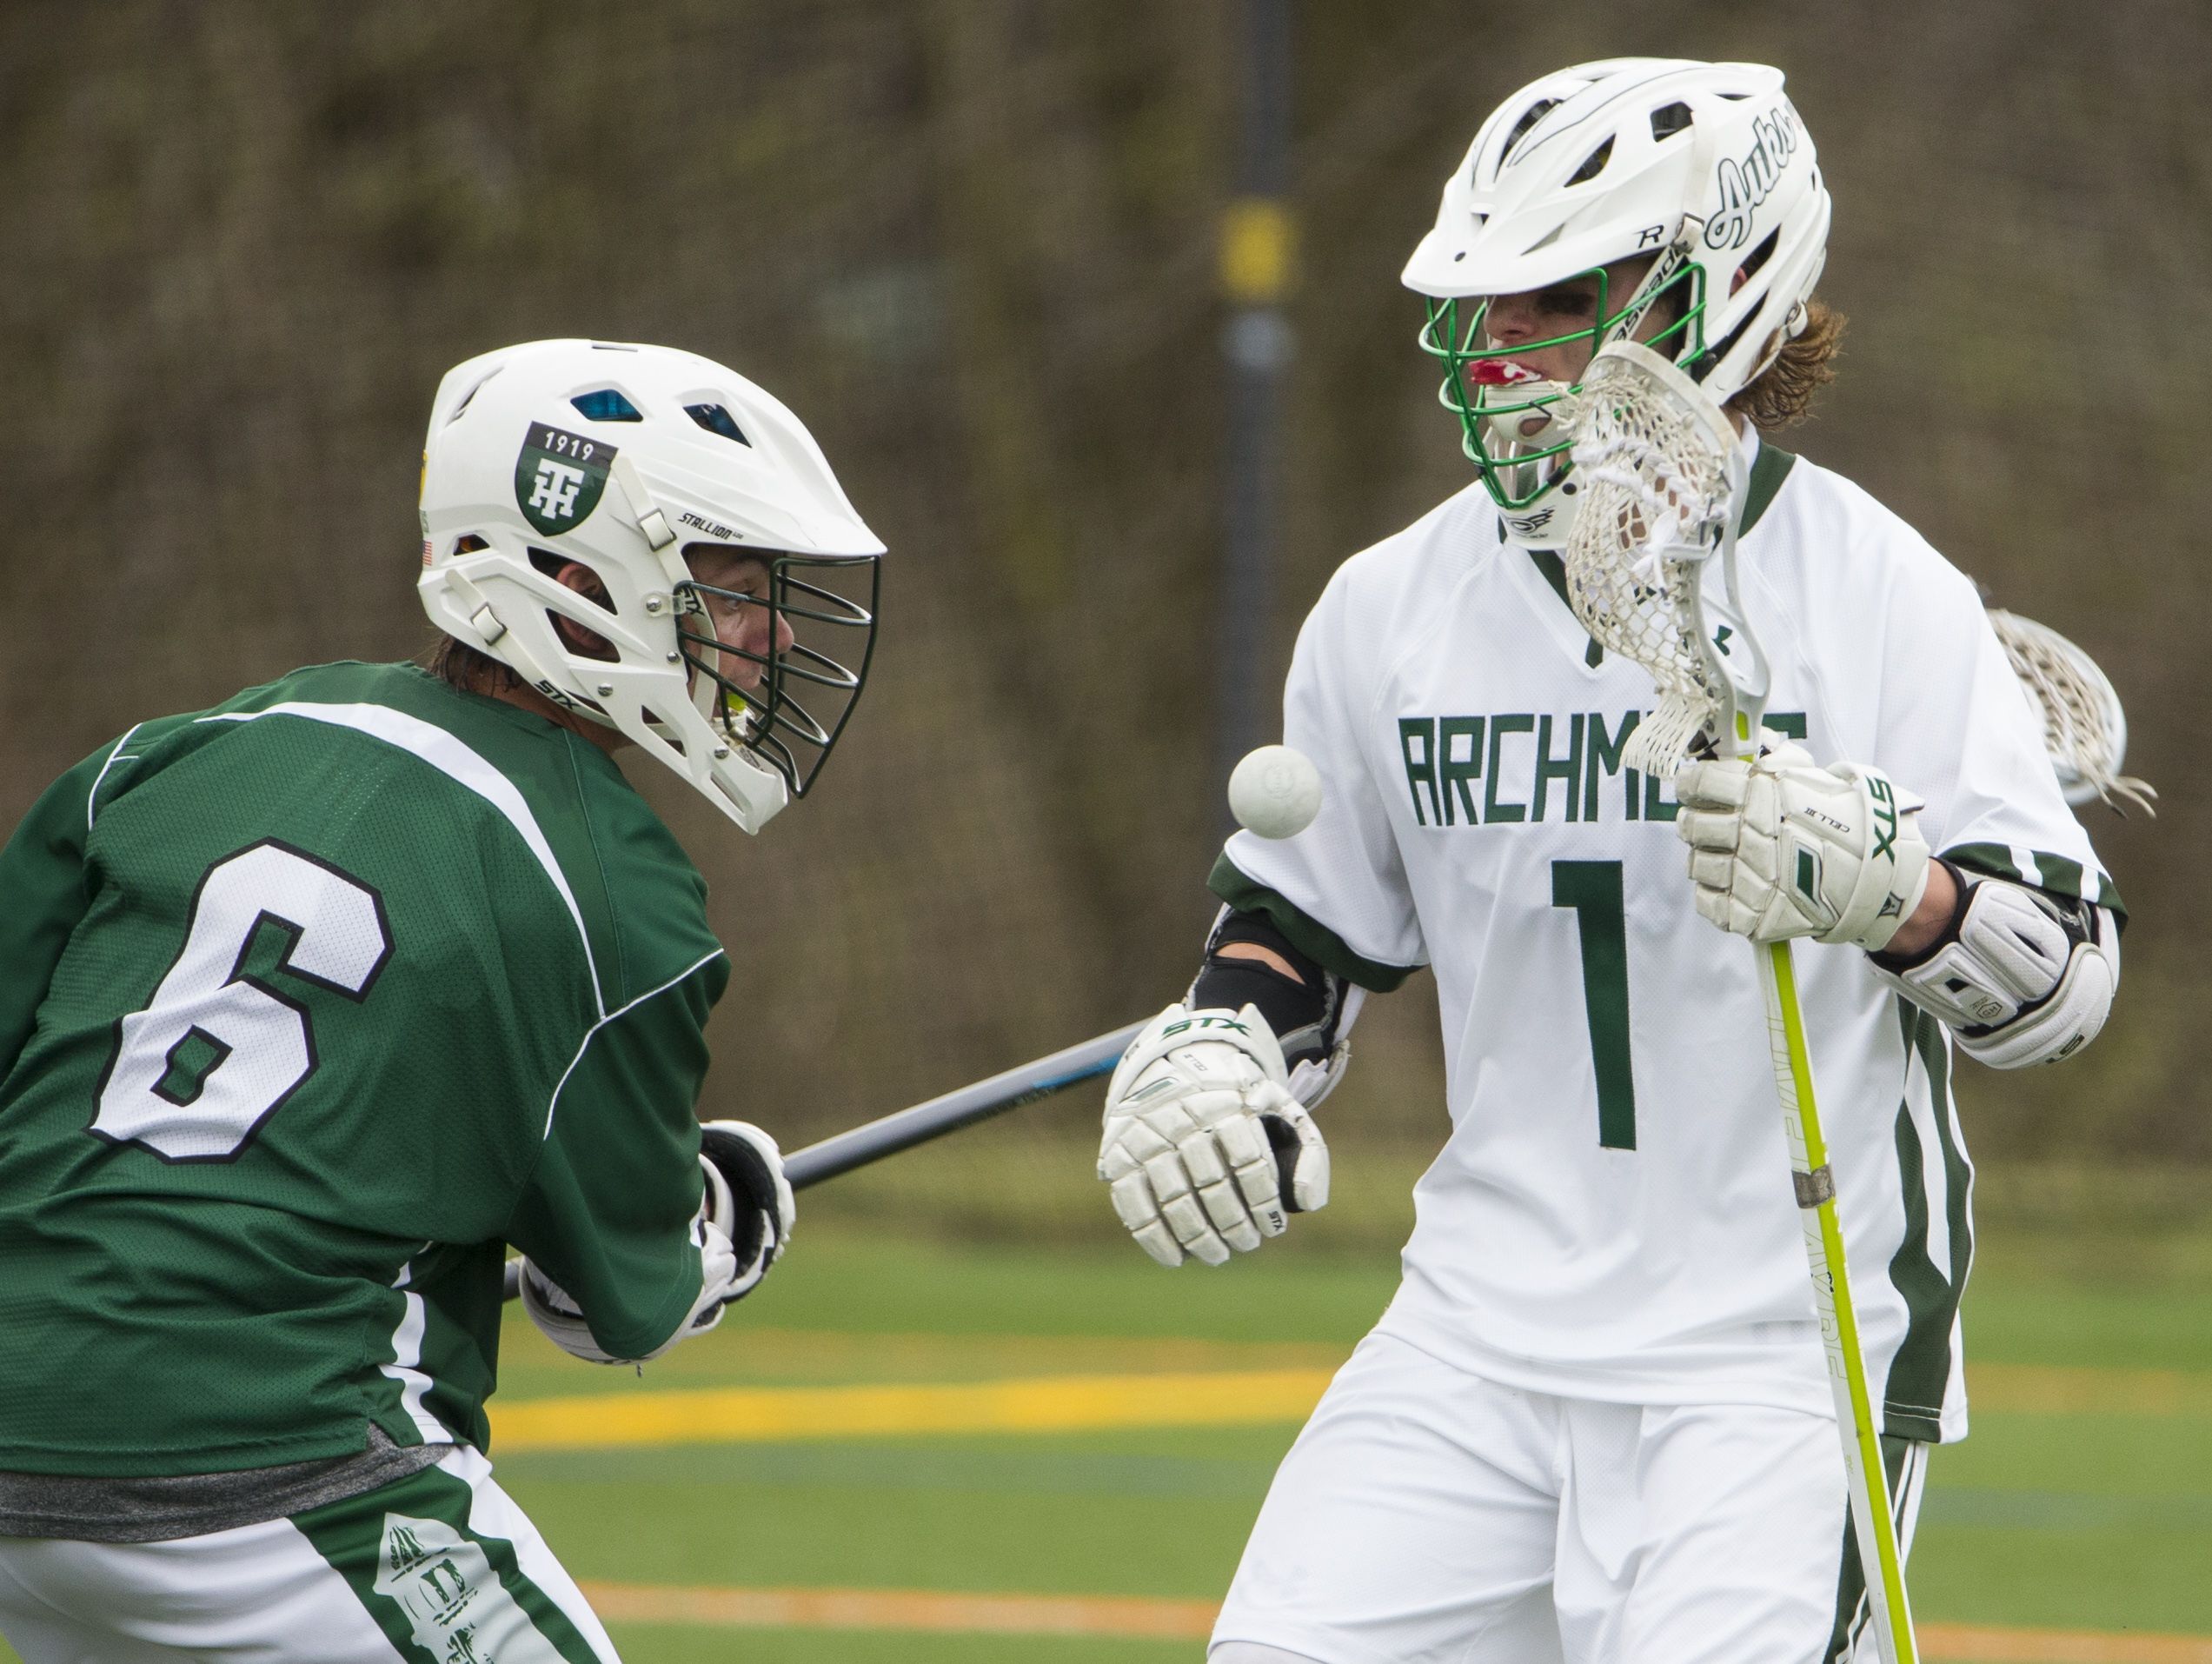 Tower Hill's Sylvester Schorn (left) moves for a loose ball against Archmere's Cole Bauer in the second half of Archmere's 12-7 win Saturday.